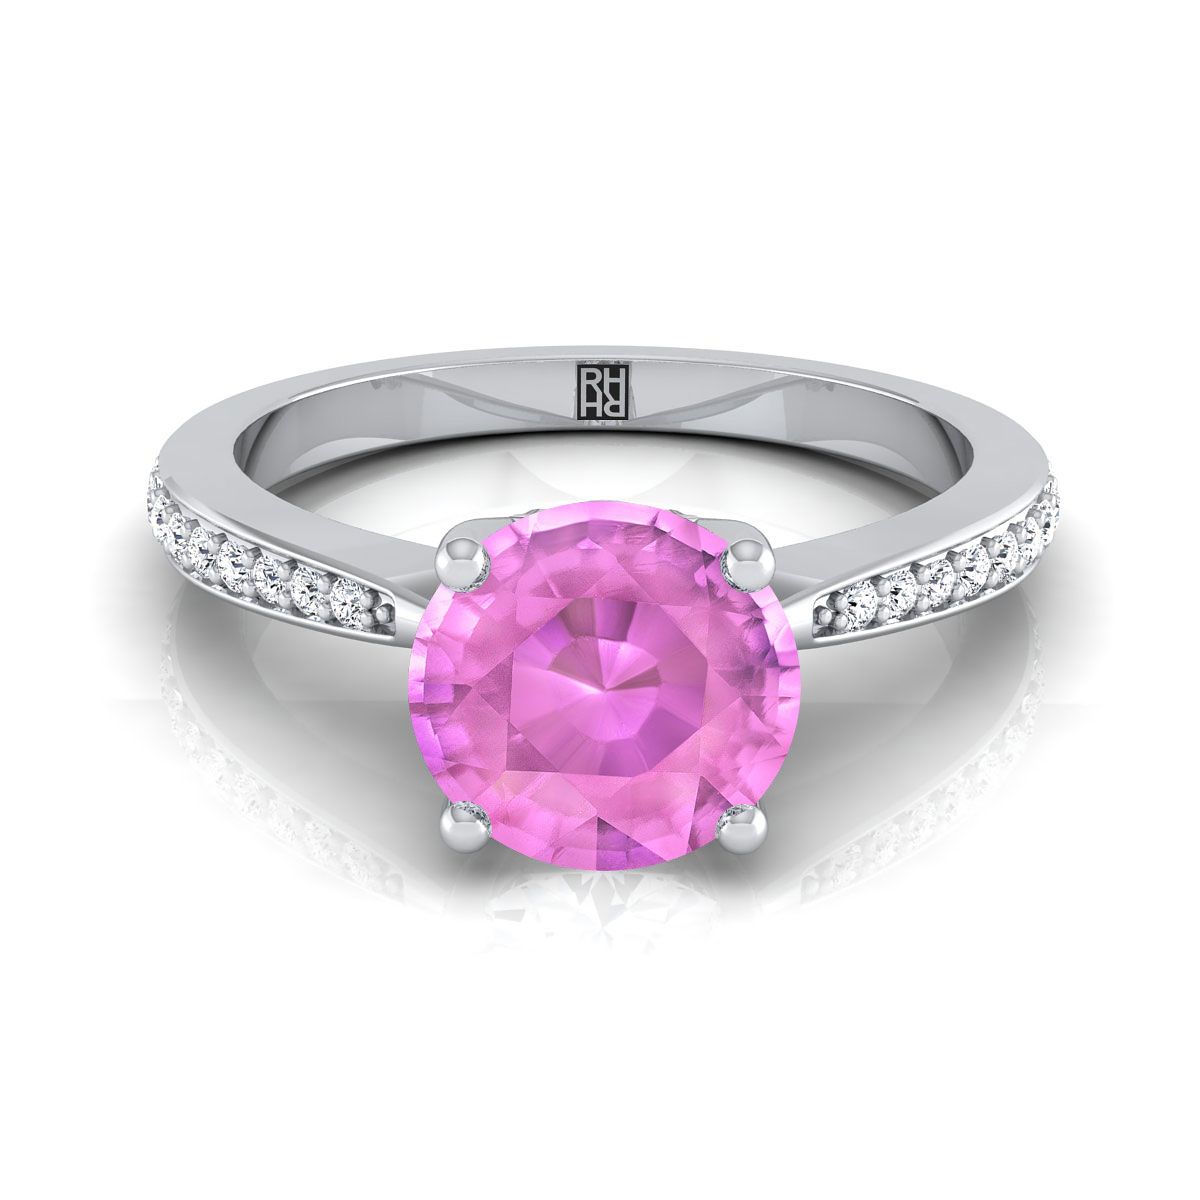 14K White Gold Round Brilliant Pink Sapphire Tapered Pave Diamond Engagement Ring -1/8ctw